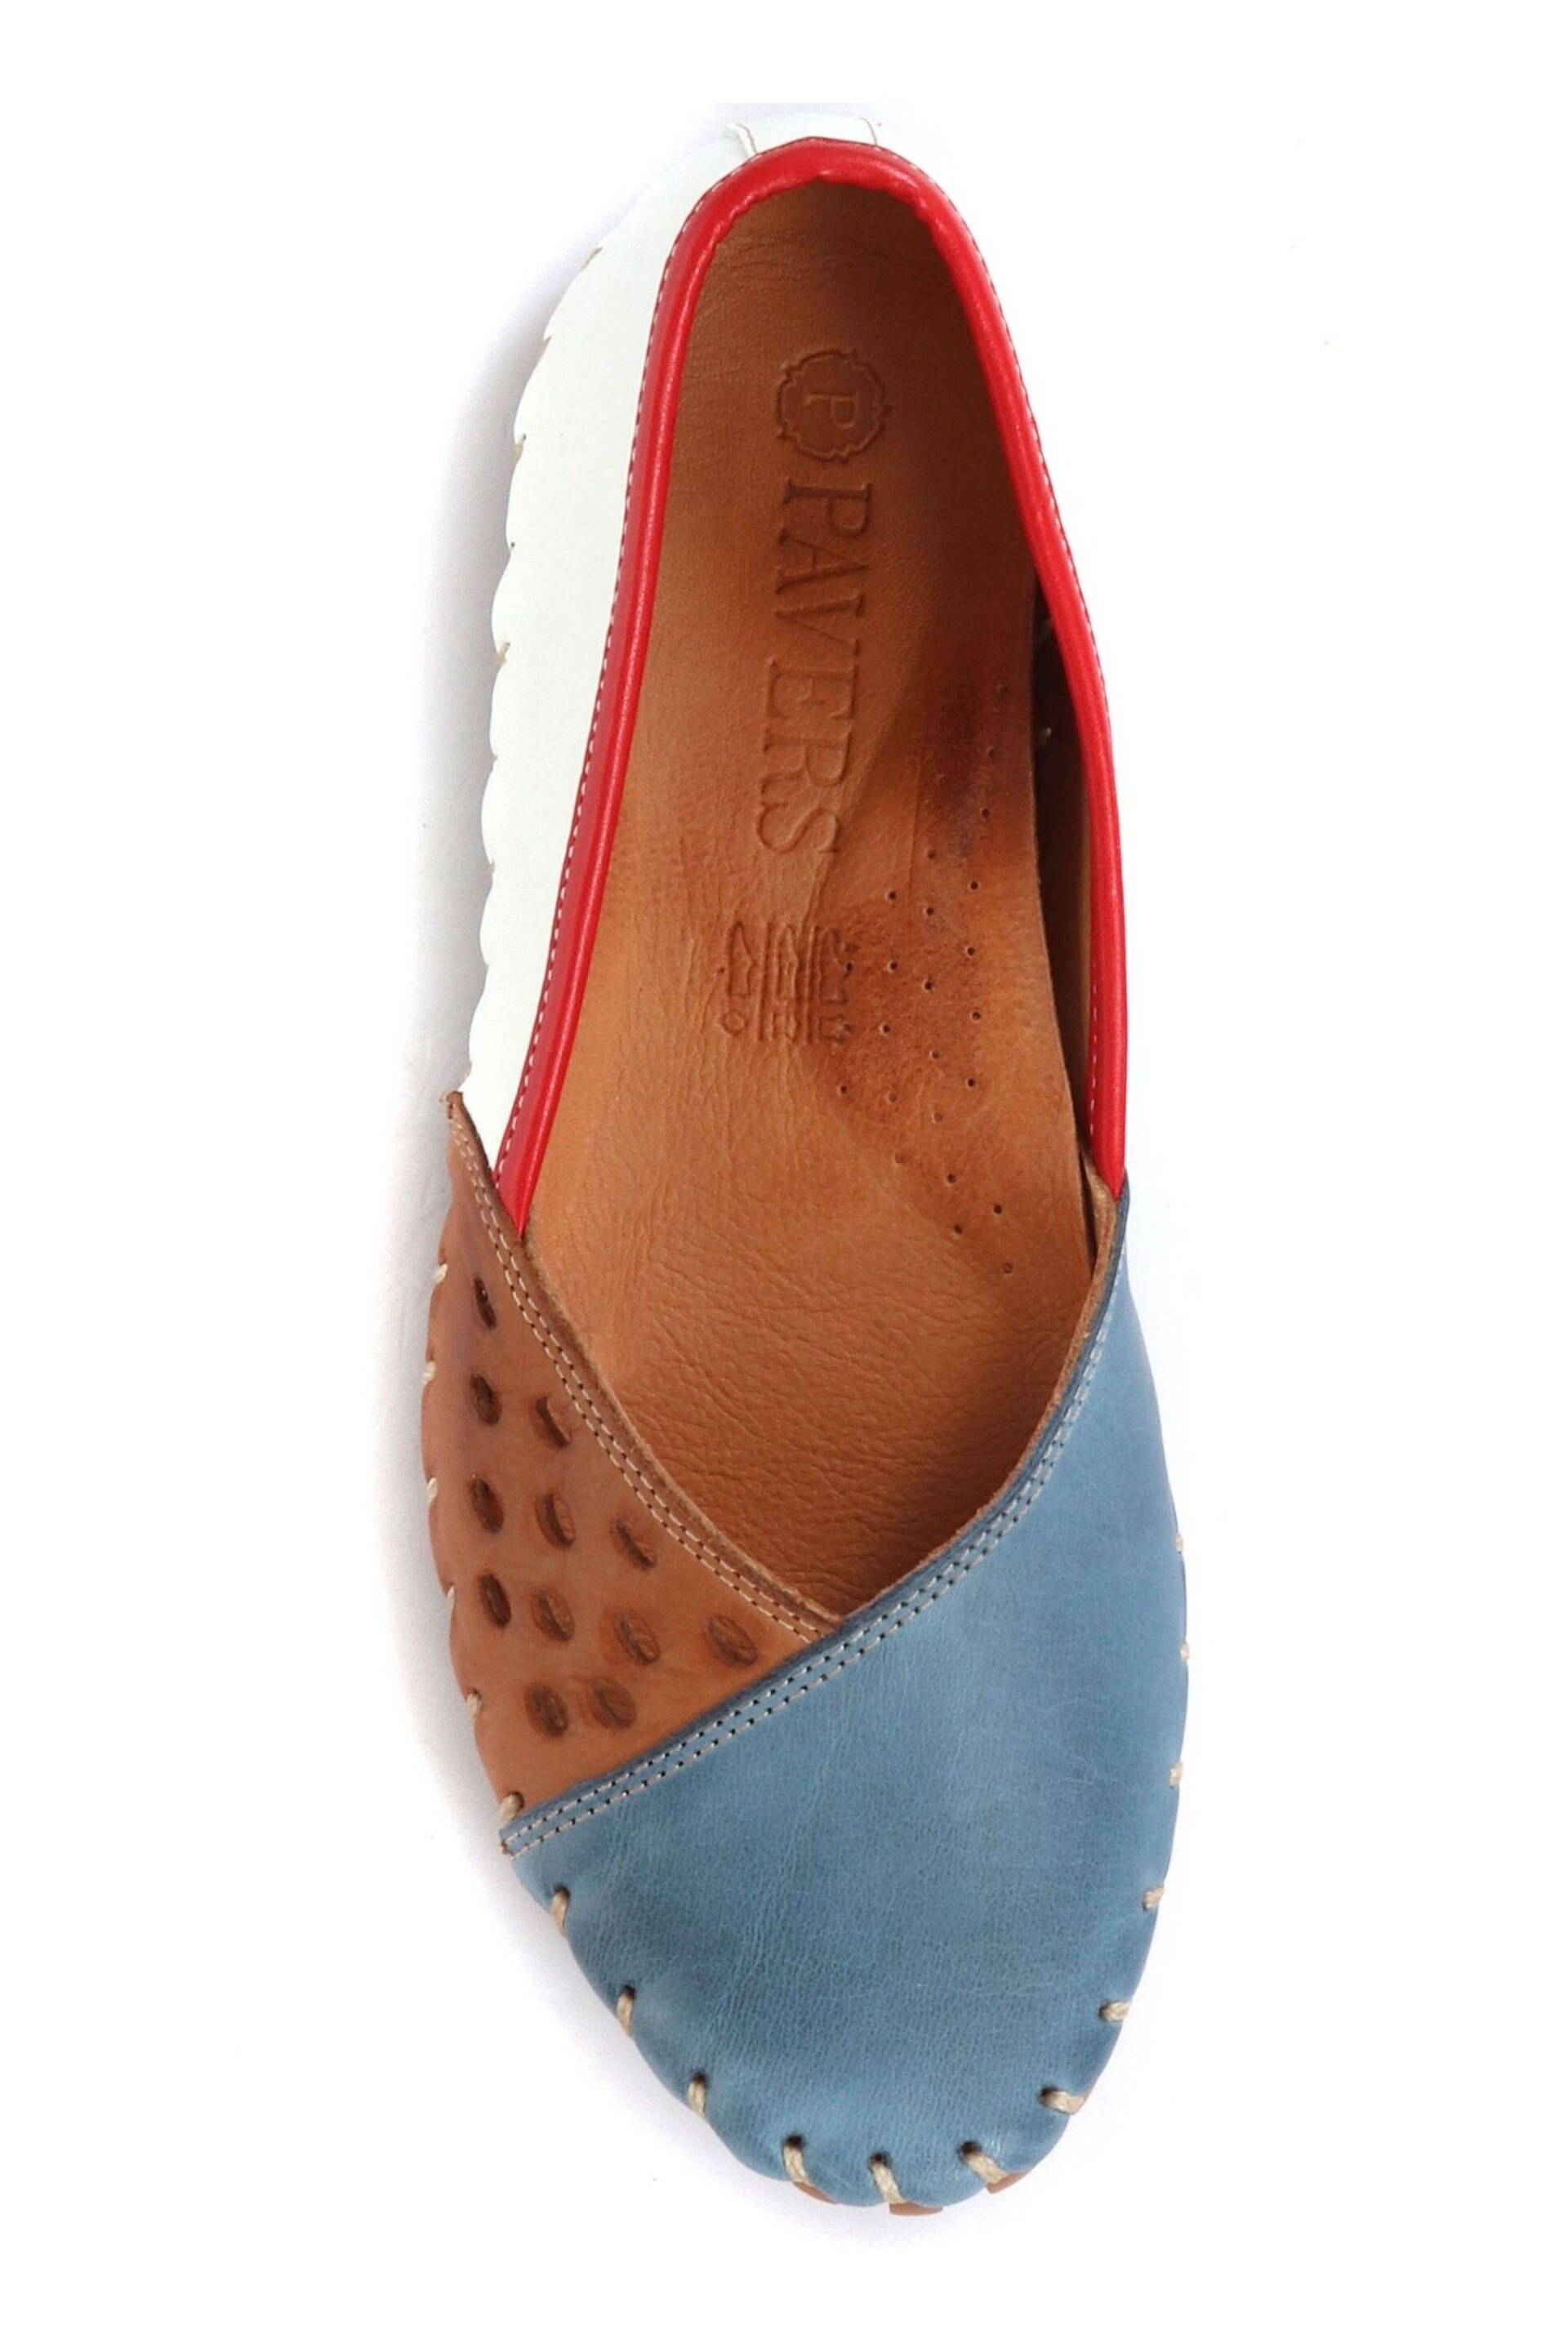 Pavers Blue/White Womens Leather Ladies Slip-On Shoes - Image 4 of 5